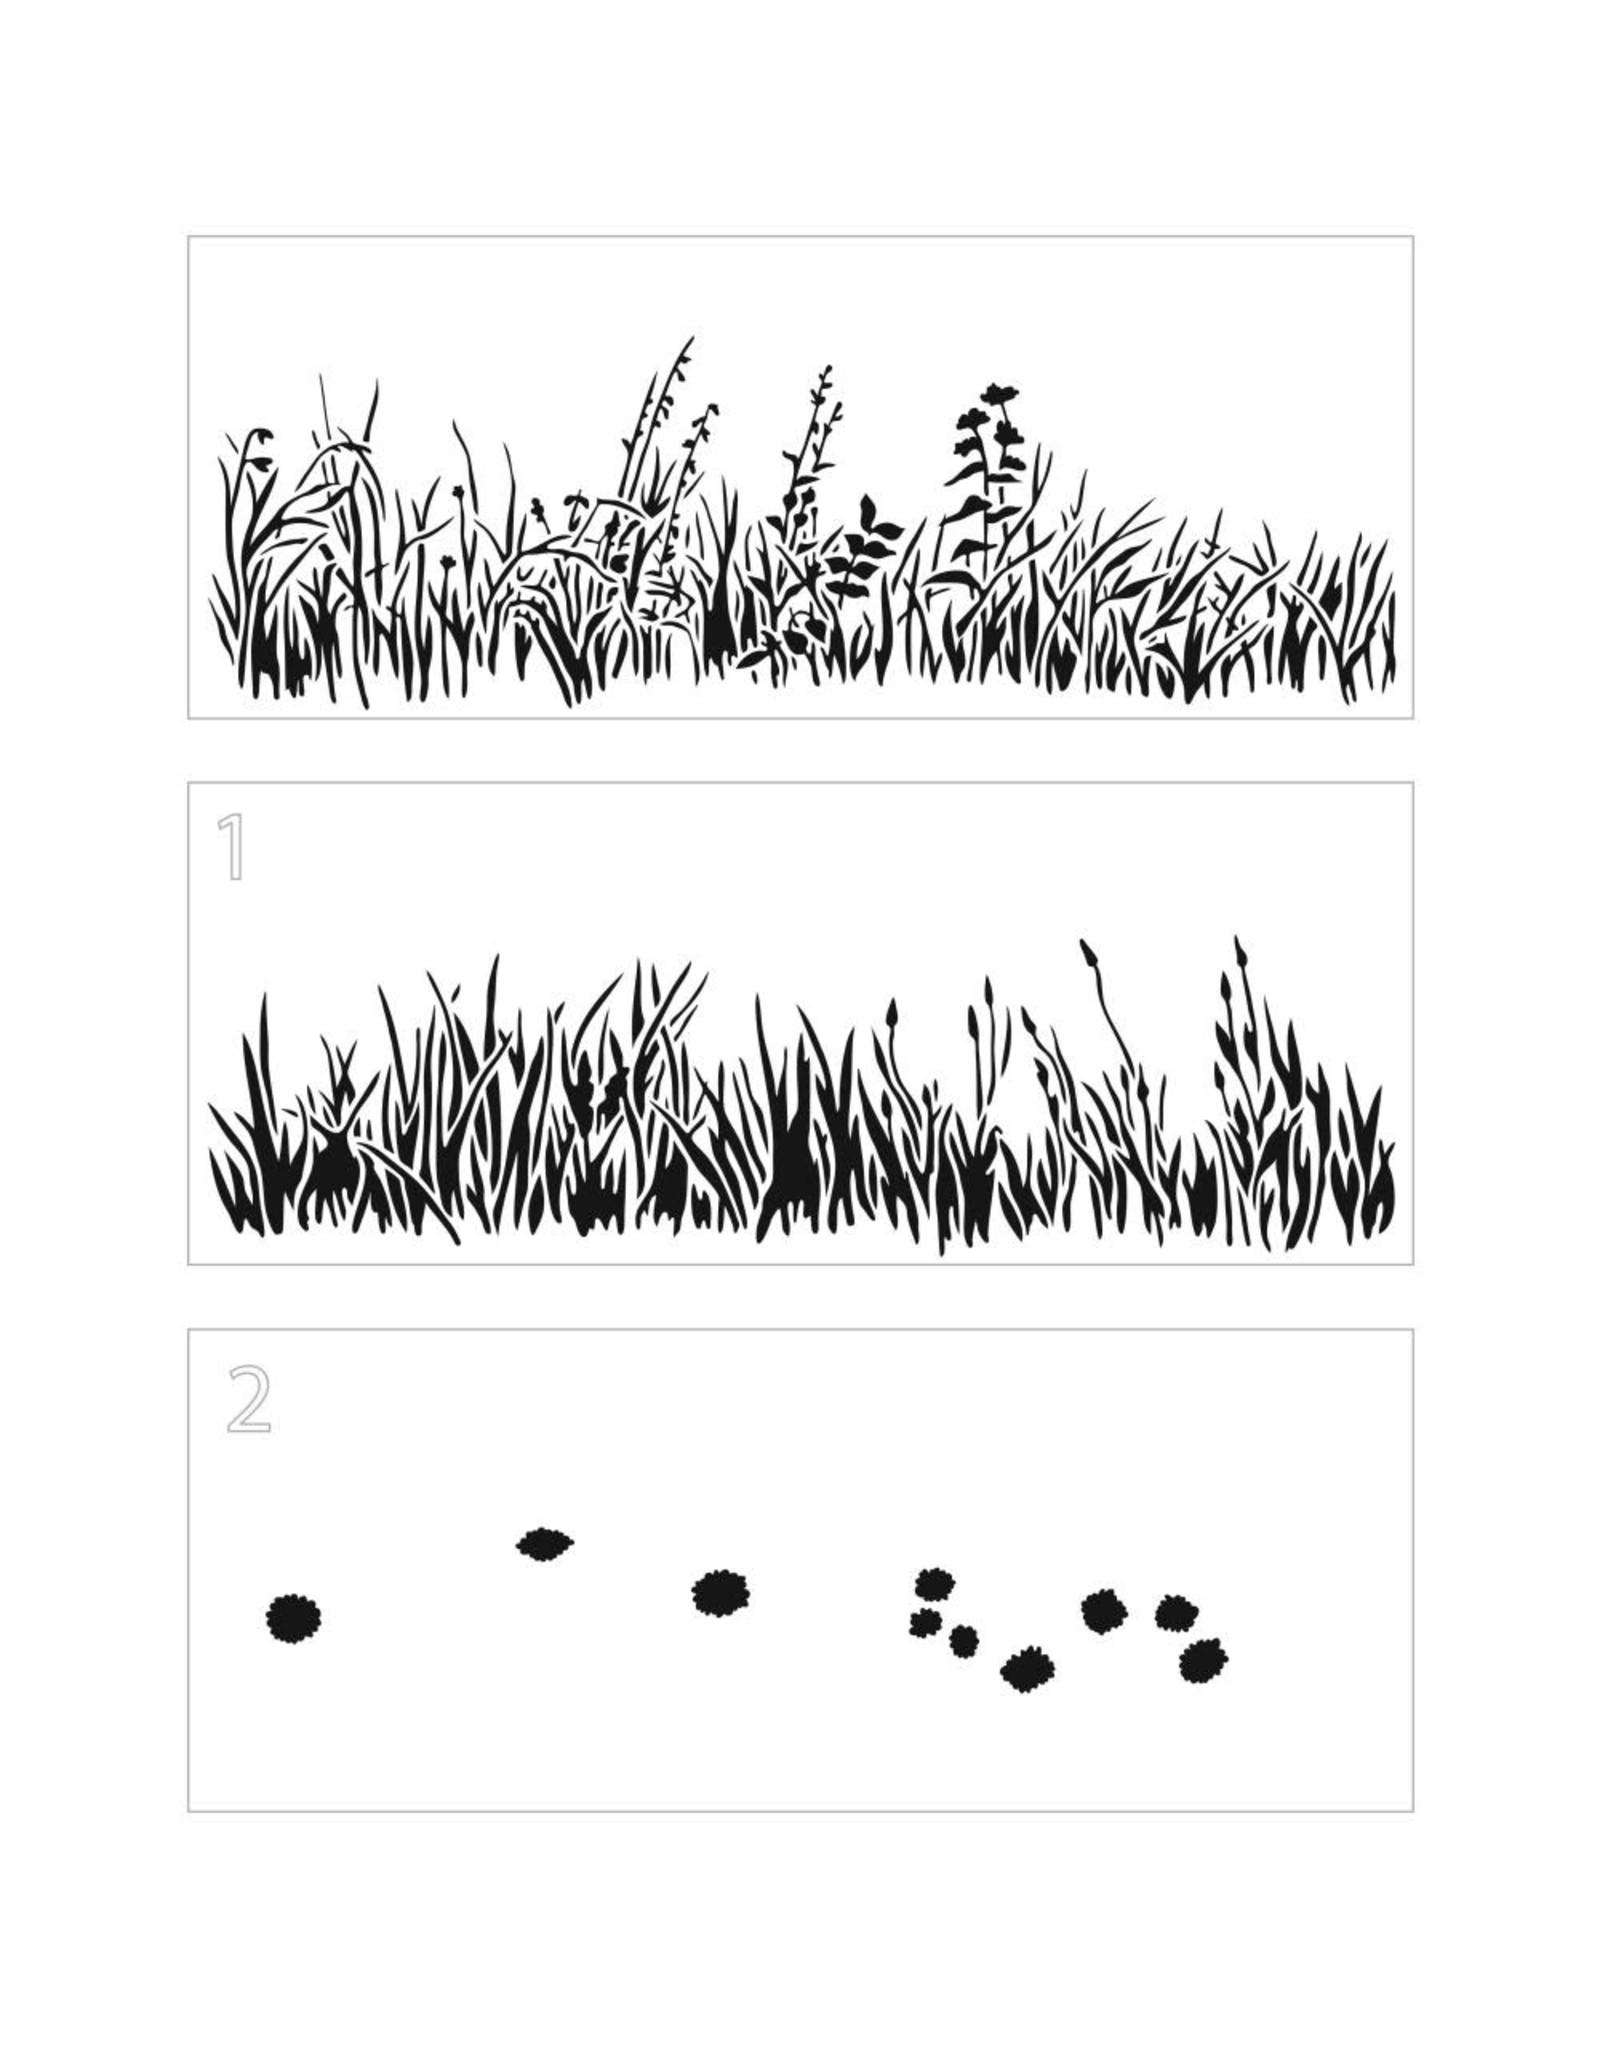 CRAFTERS WORKSHOP THE CRAFTERS WORKSHOP GRASSES 8.5x11 SLIMLINE LAYERED STENCIL